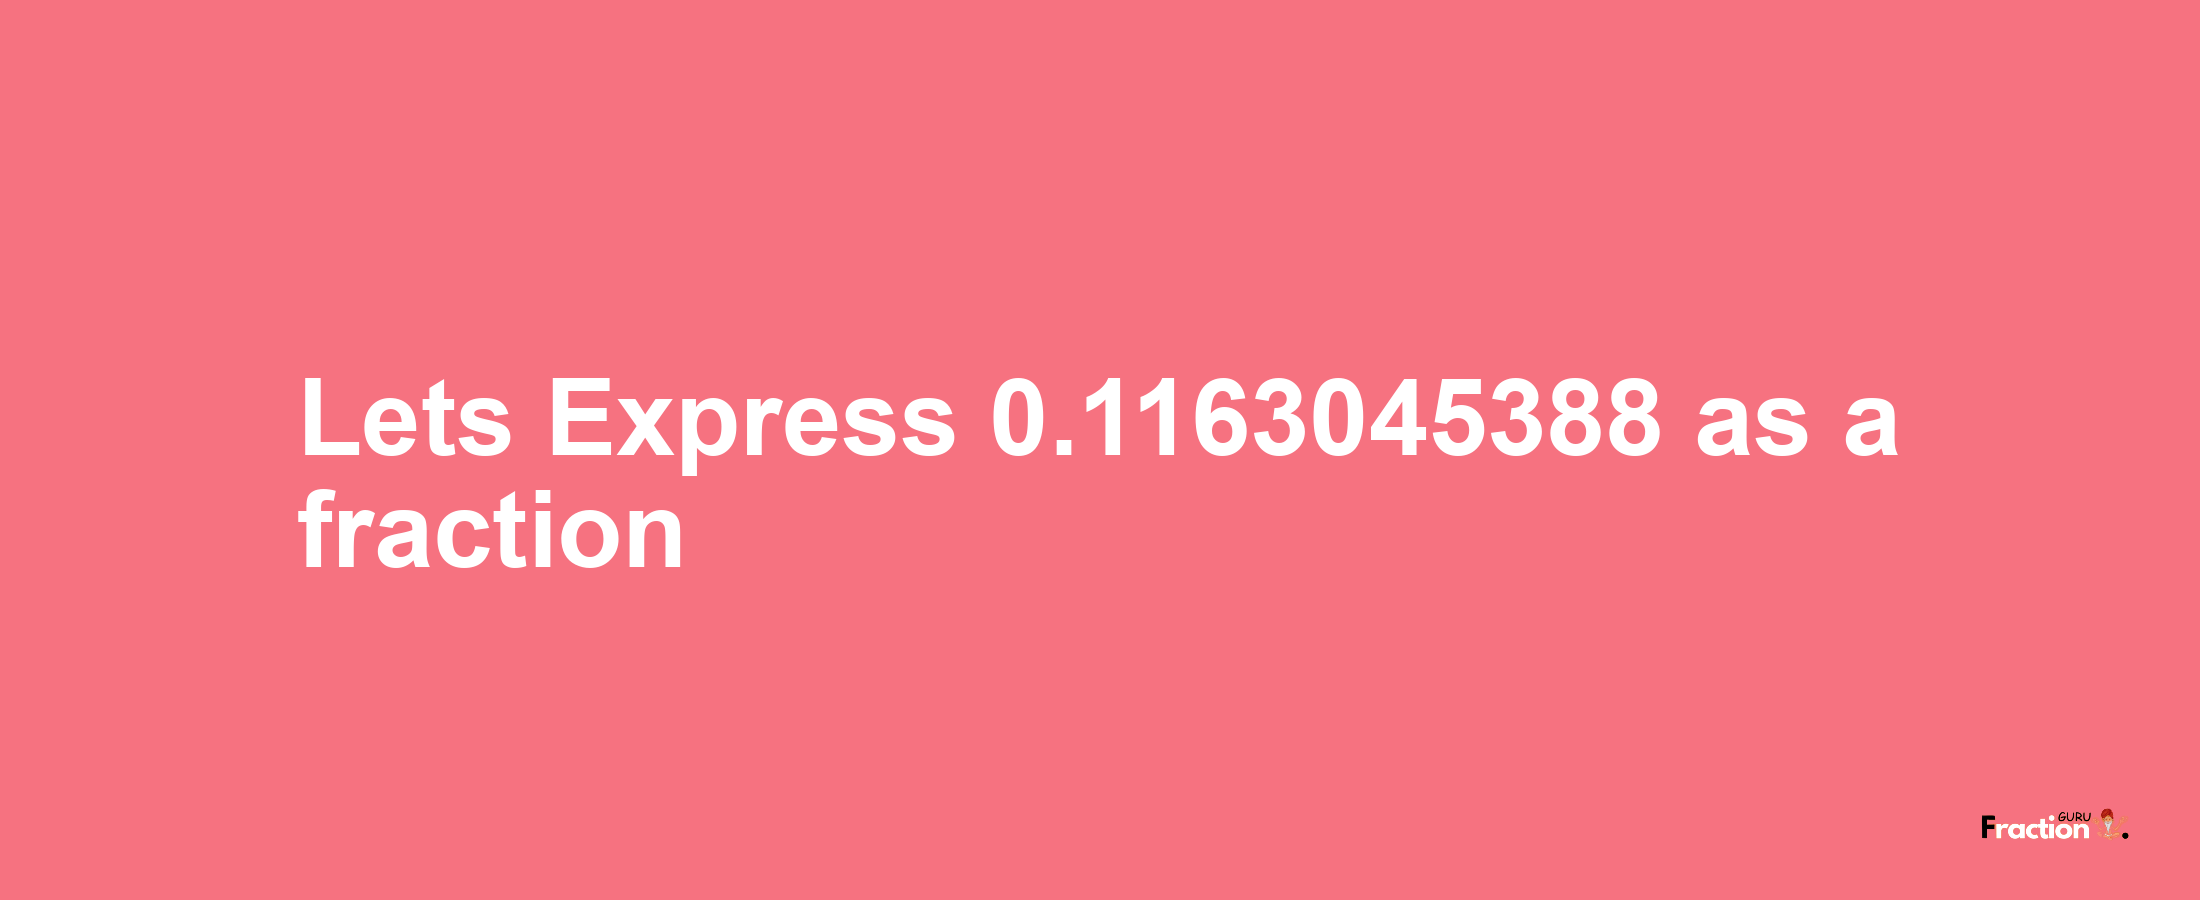 Lets Express 0.1163045388 as afraction